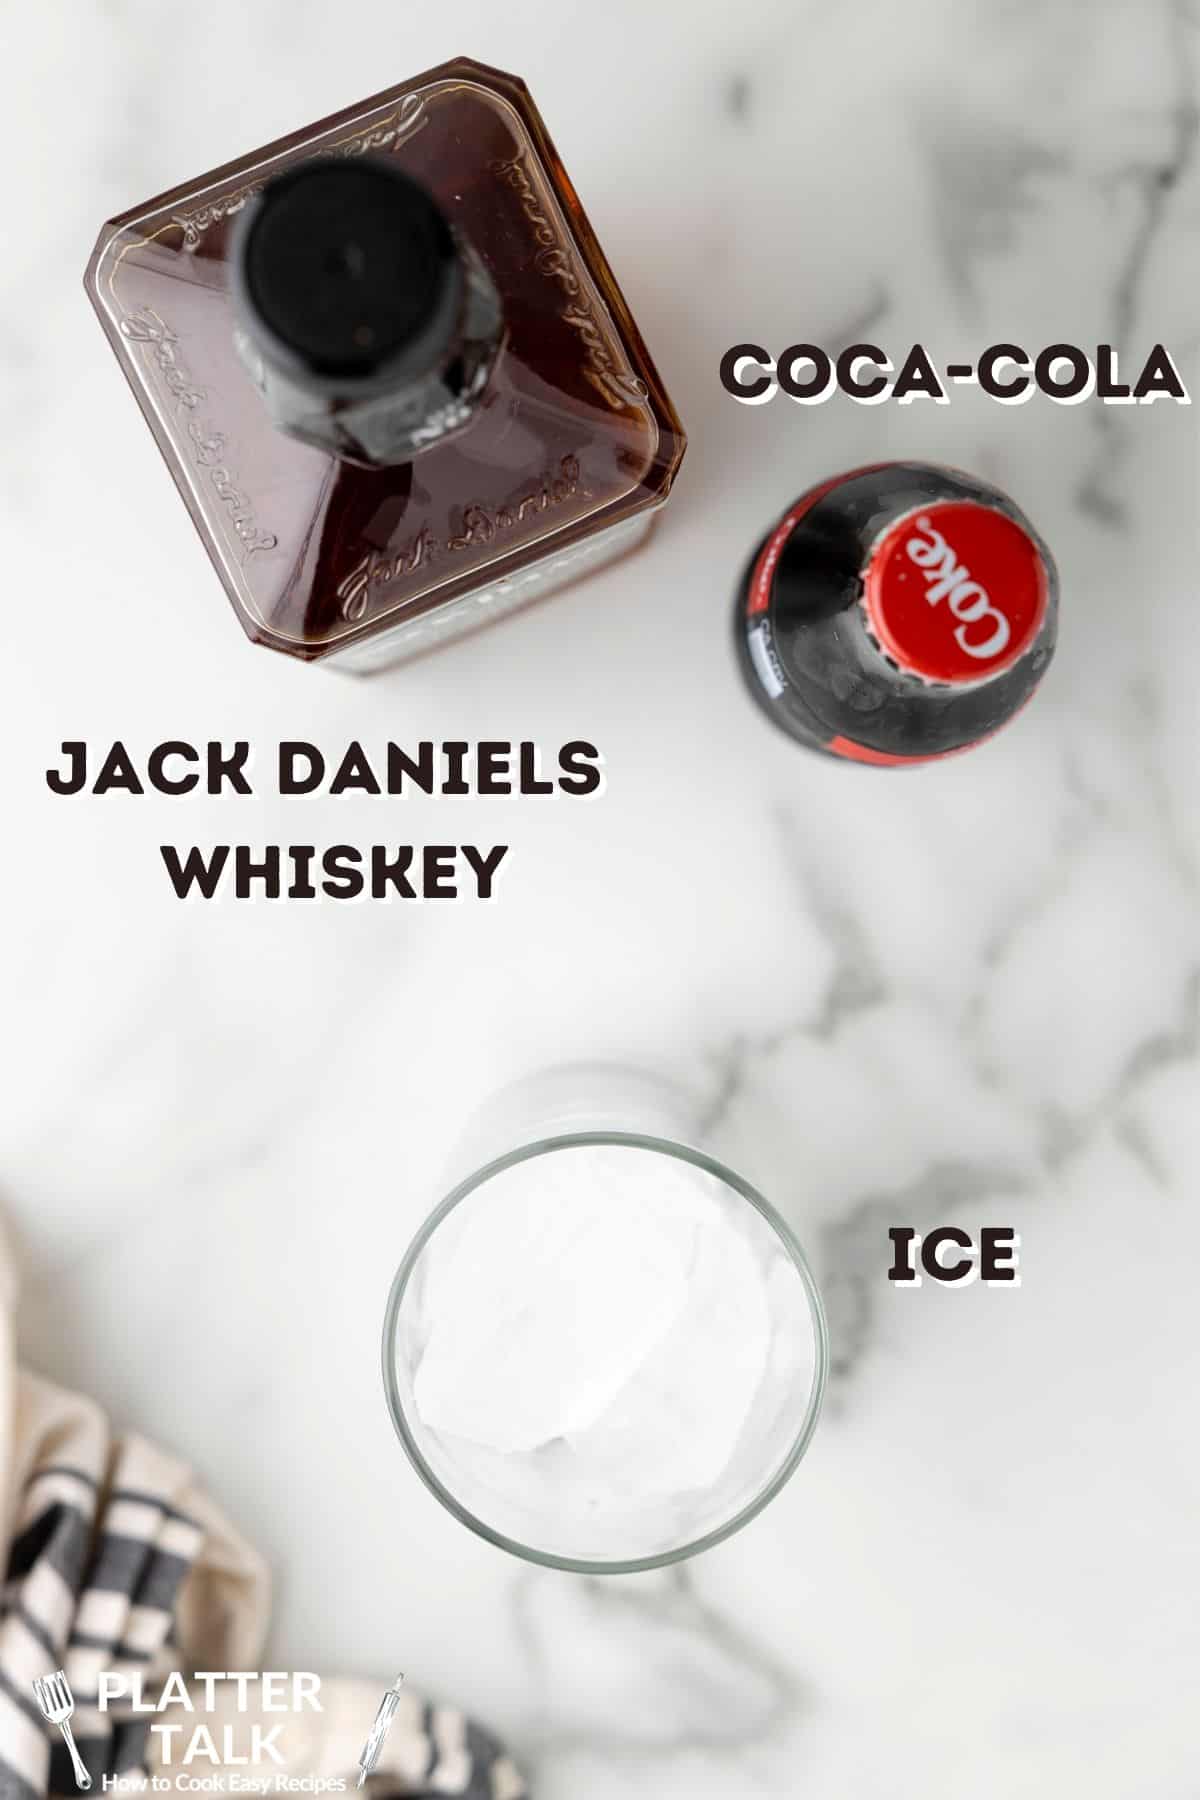 A bottle of Jack Daniels Whiskey and a bottle of coke with glass of ice.